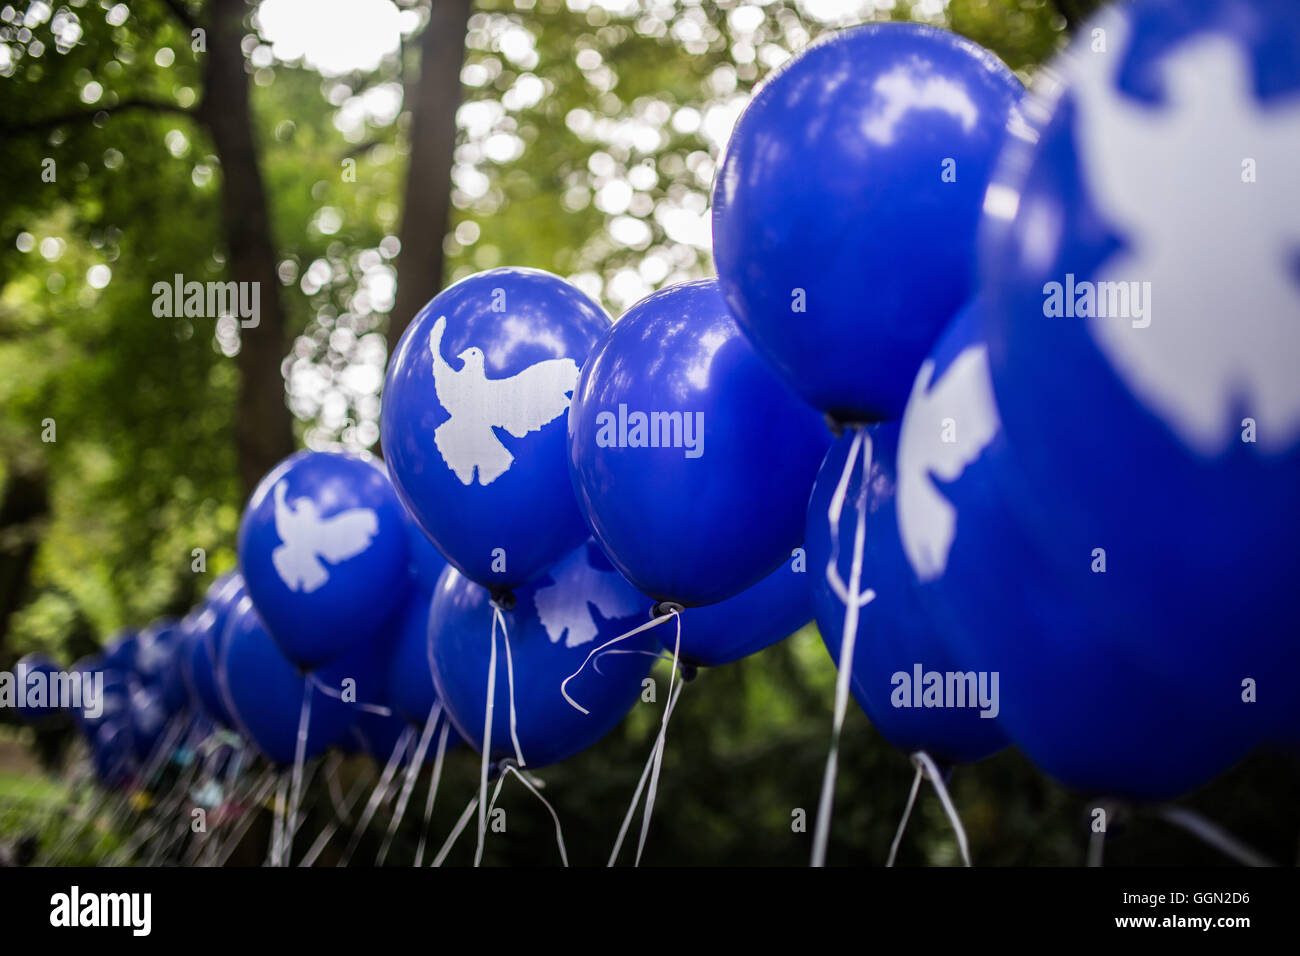 Berlin, Germany. 06th Aug, 2016. Balloons printed with peace doves hang in Volkspark Friedrichshain park in Berlin, Germany, 06 August 2016. The Peace Bells rang Saturday morning to commemorate the victims of the atomic bombings in Hiroshima (06 August 1945) and Nagasaki (09 August 1945). Photo: SOPHIA KEMBOWSKI/dpa/Alamy Live News Stock Photo